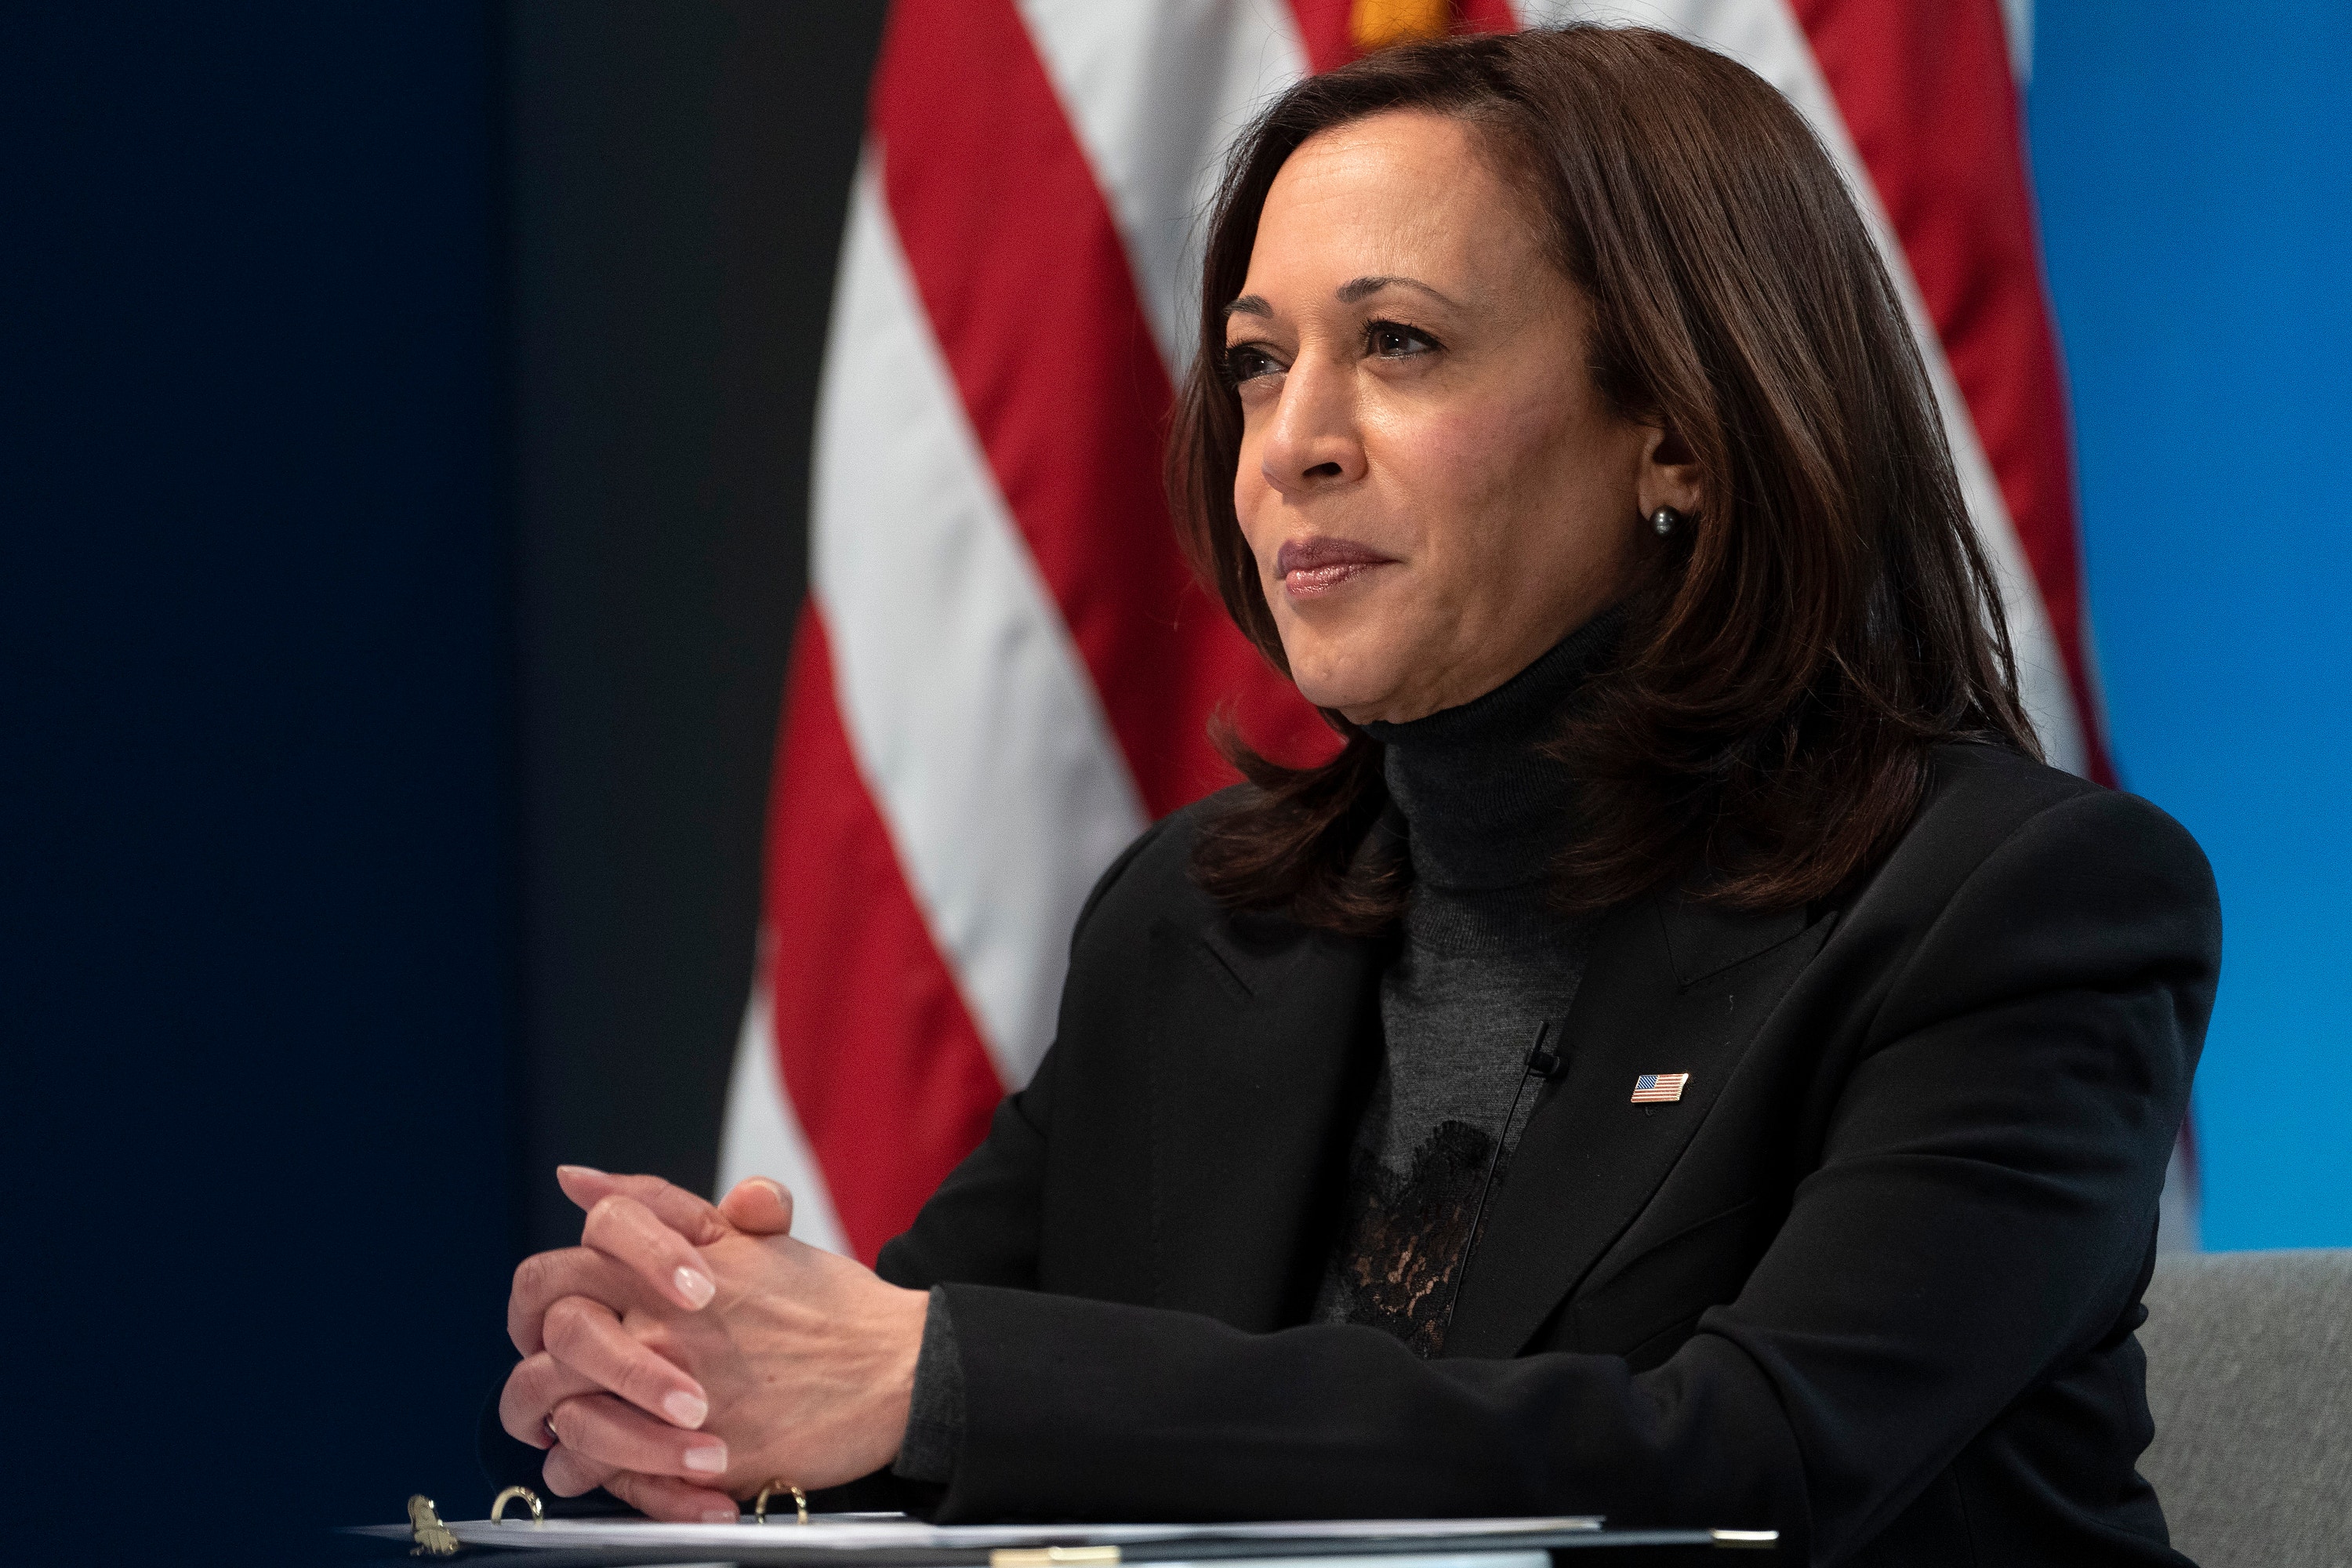 VP Kamala Harris holds unusual bilateral meeting with a foreign leader at the White House